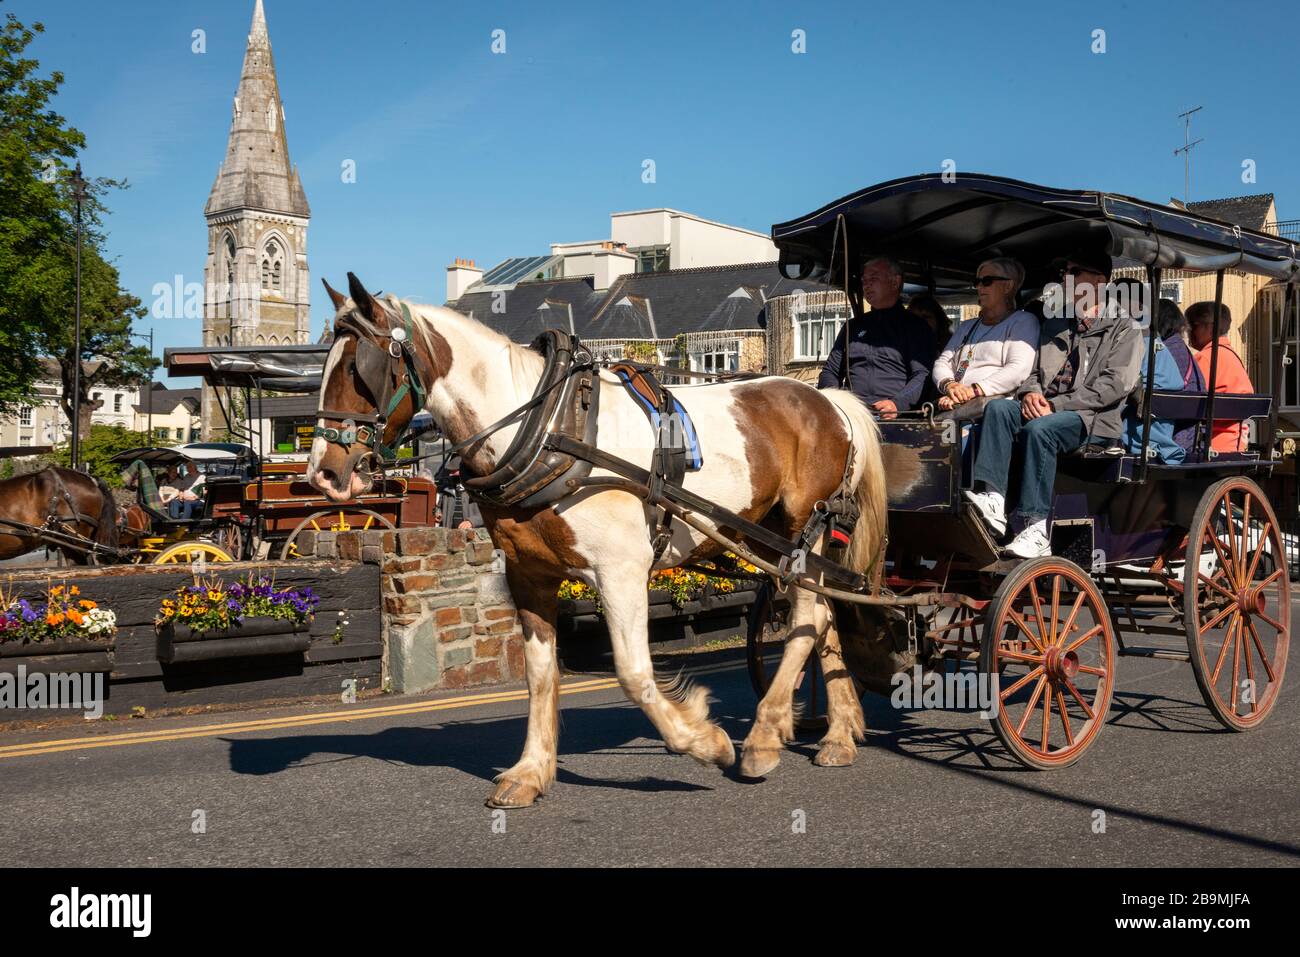 Killarney popular tourist activity as horse drawn carriage or jaunting car with tourists in the streets on bright sunny day in Killarney Ireland Stock Photo